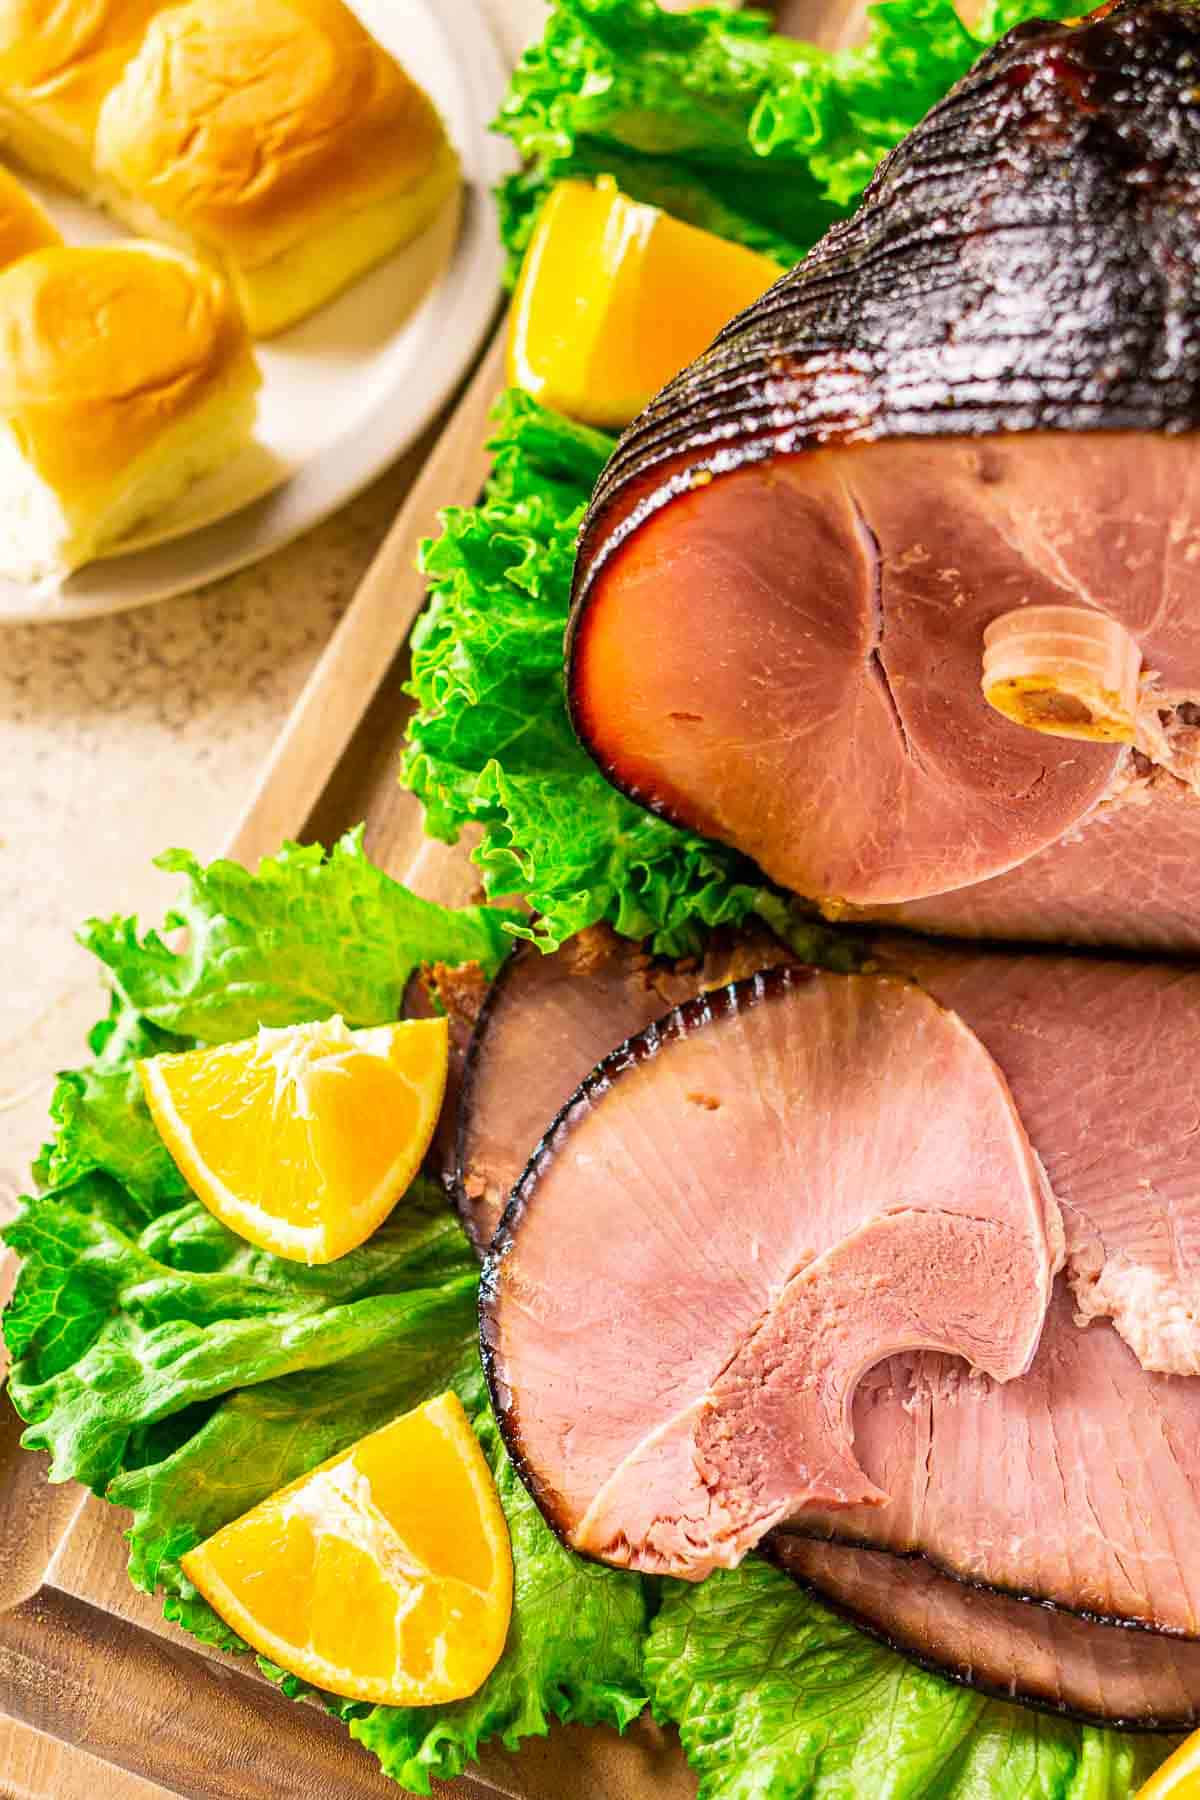 An aerial view of the double-smoked ham on green lettuce and a cutting board with a plate of rolls in the corner.